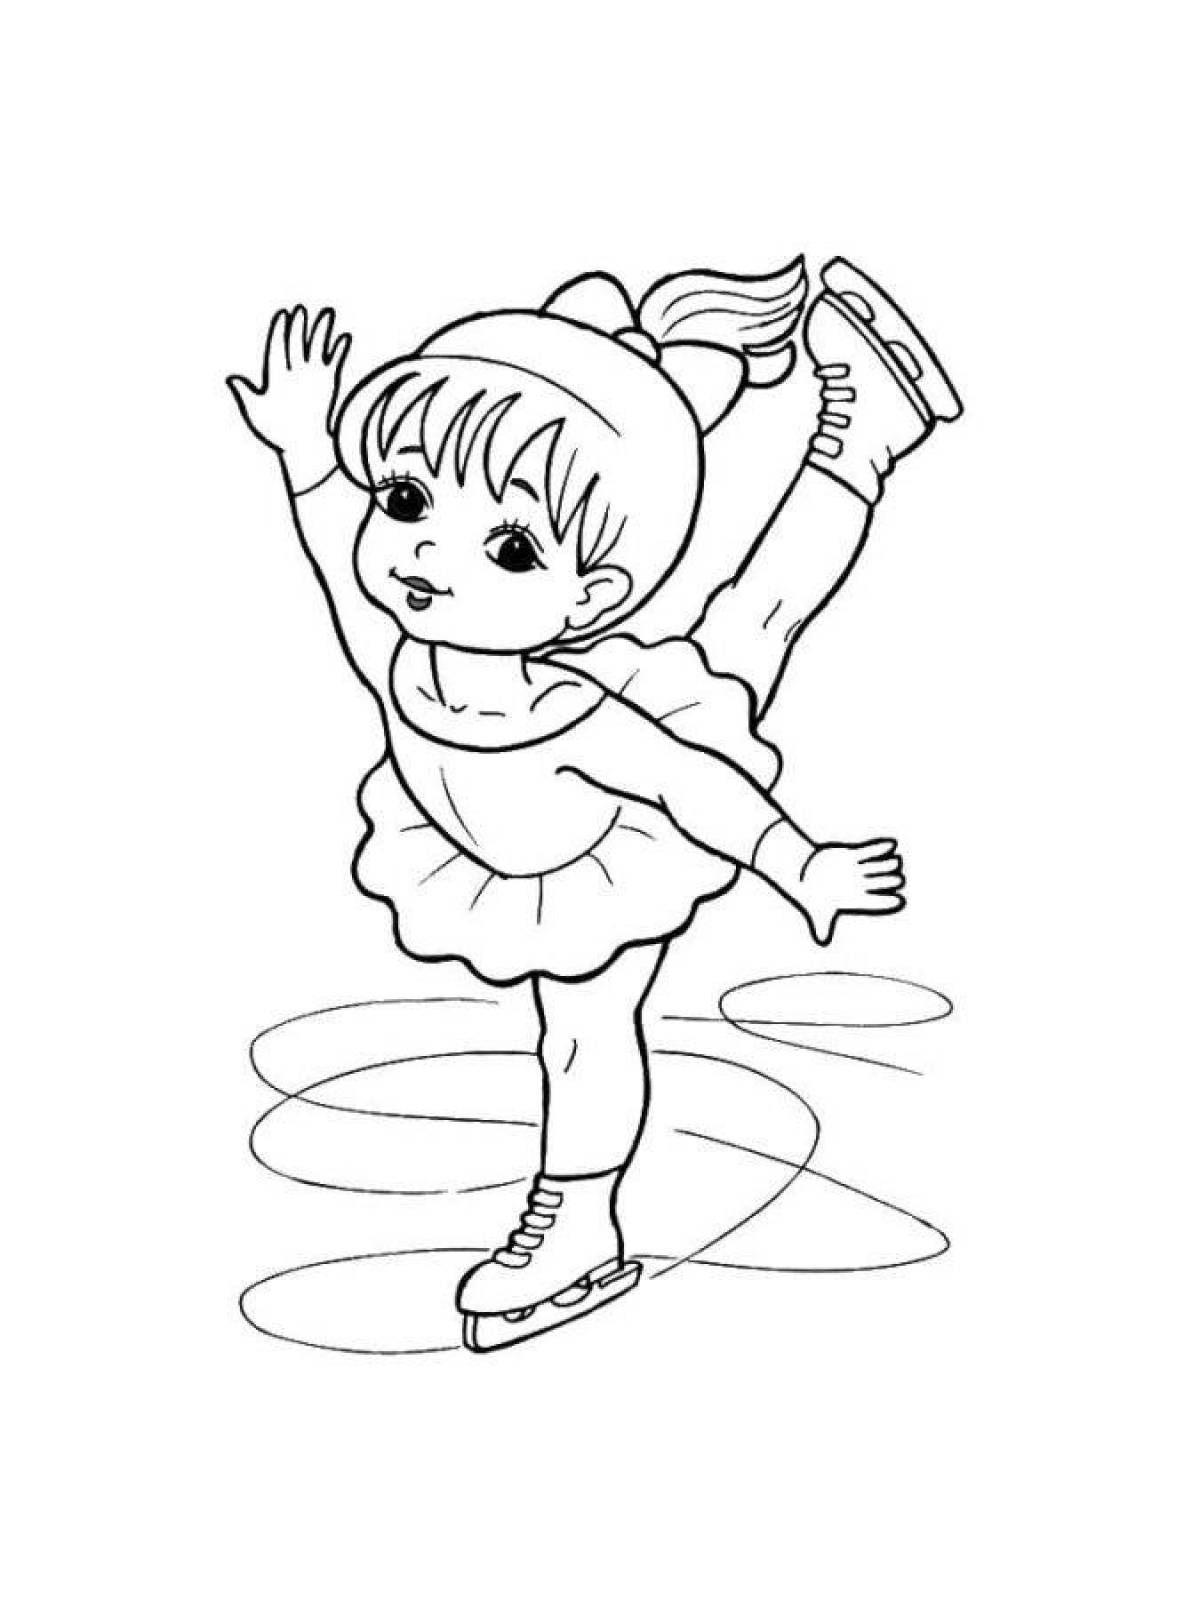 Bright figure skating coloring page